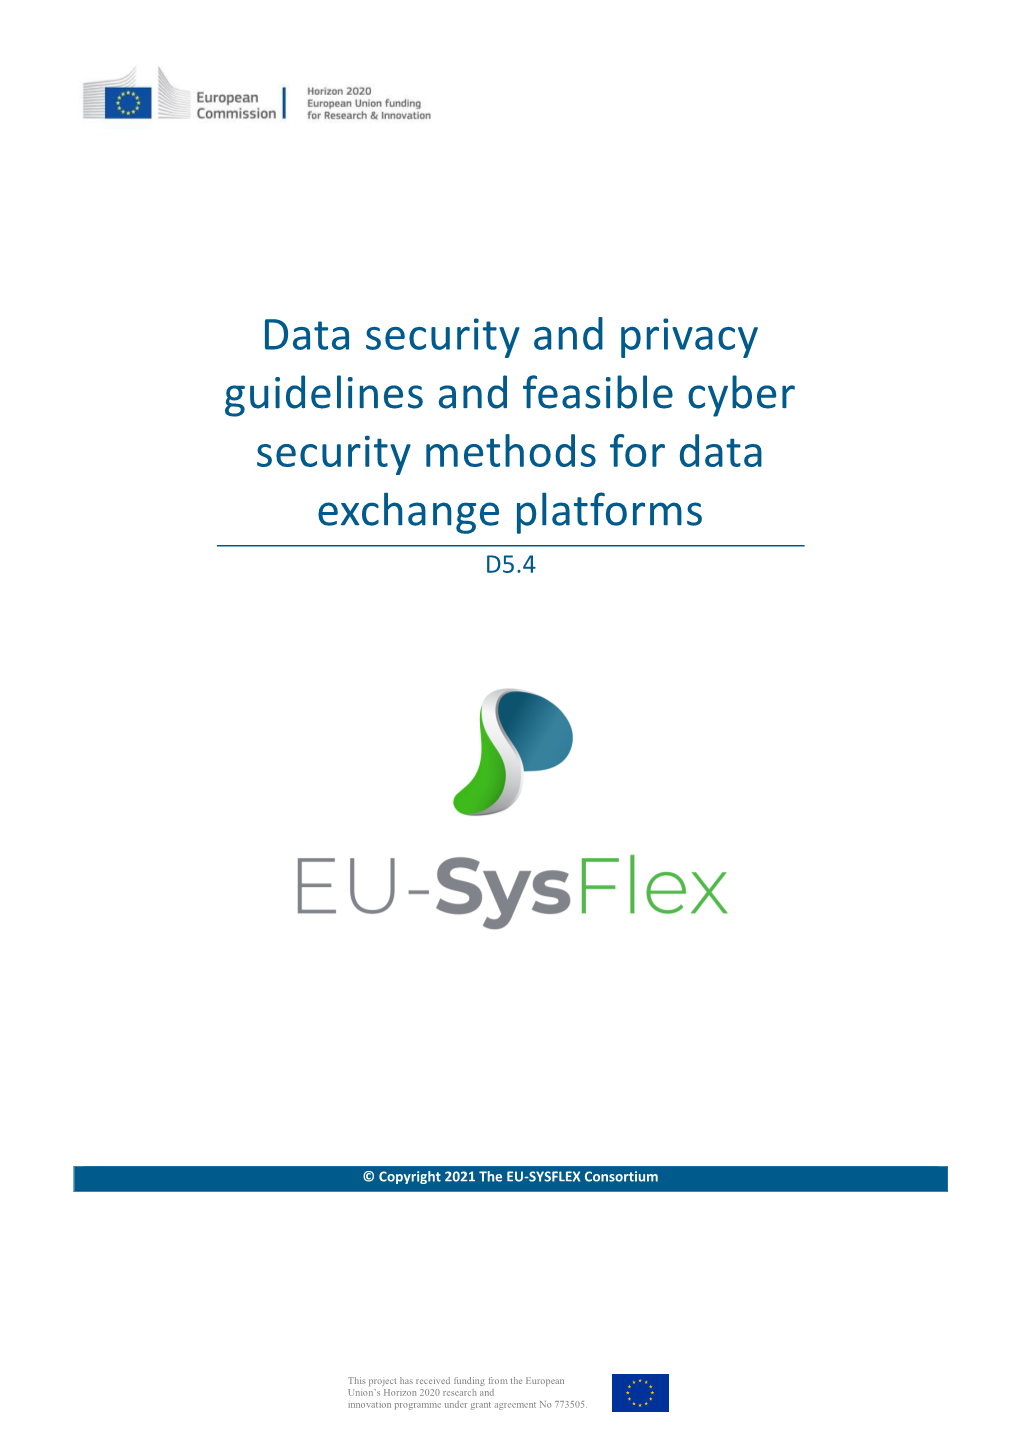 Data Security and Privacy Guidelines and Feasible Cyber Security Methods for Data Exchange Platforms D5.4